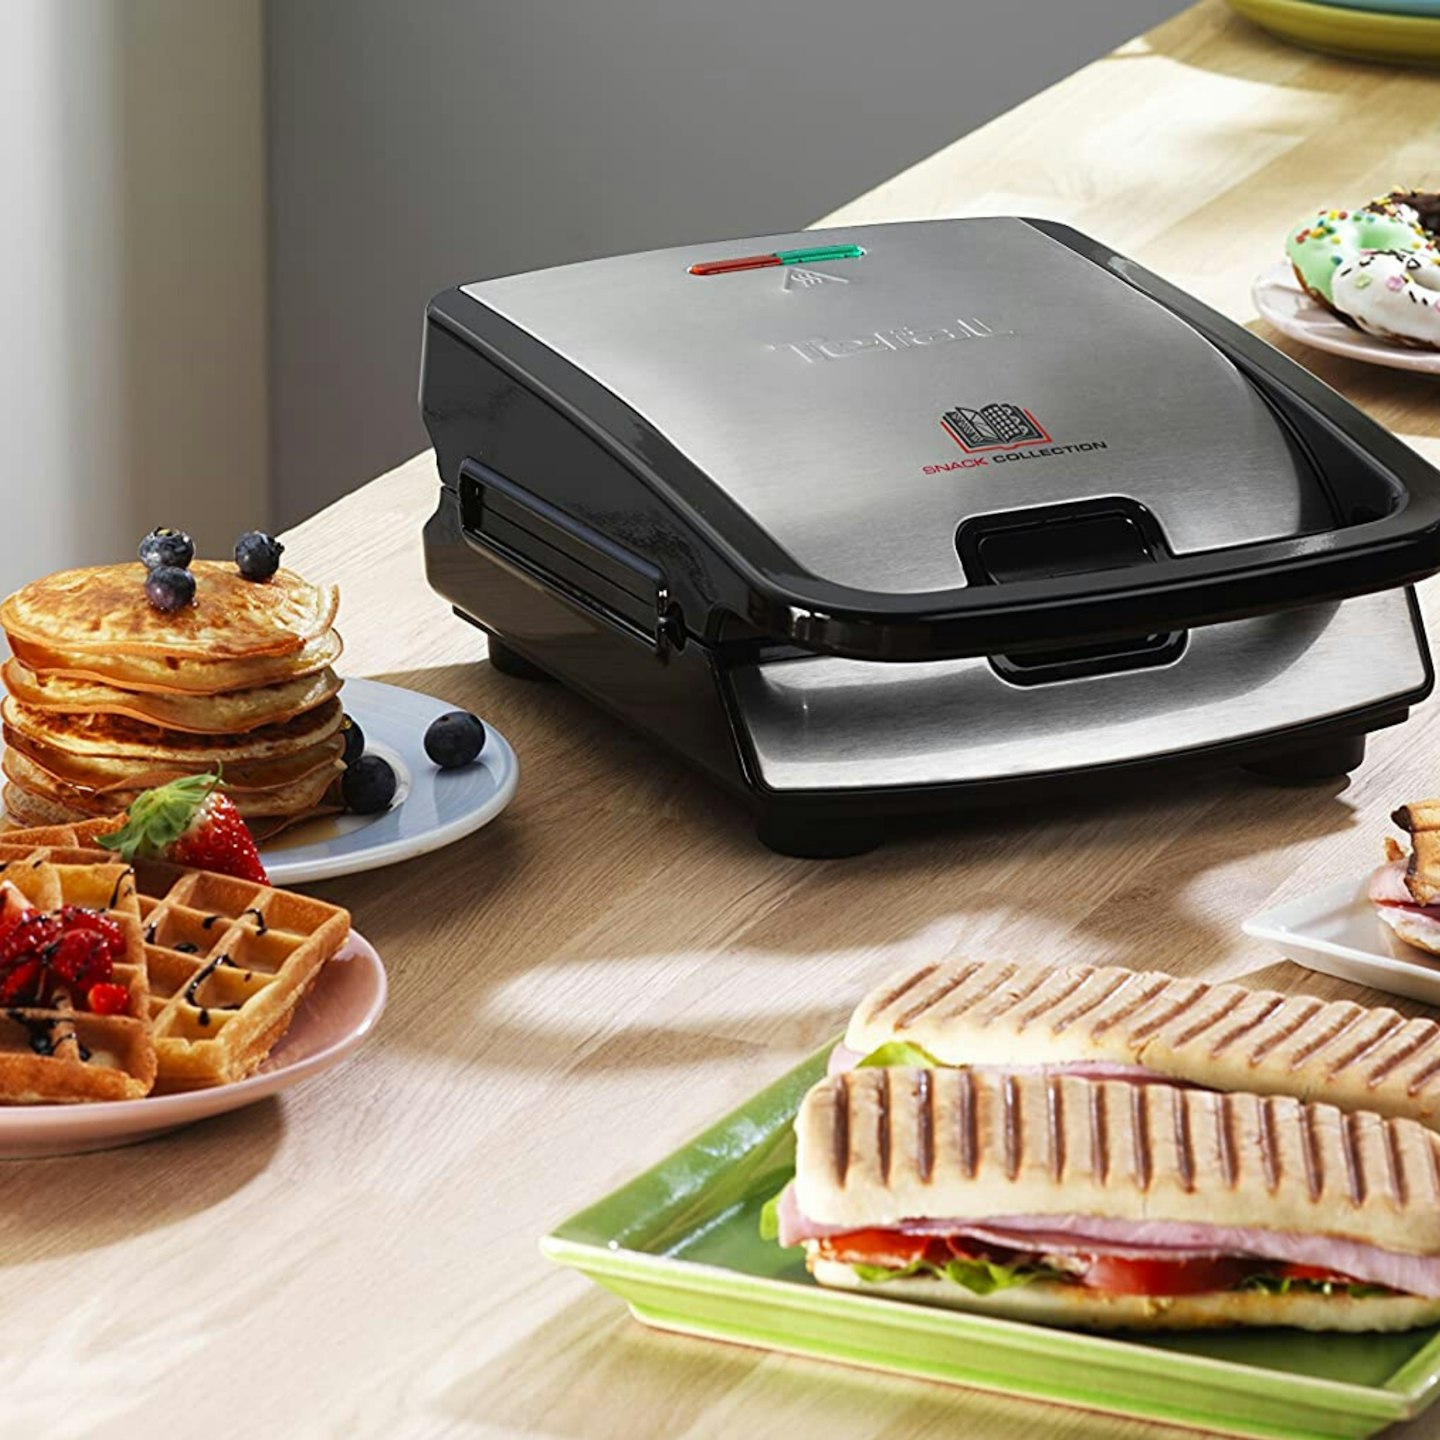 Tefal SW852D27 Snack Collection Multi-Function Sandwich and Snack Maker